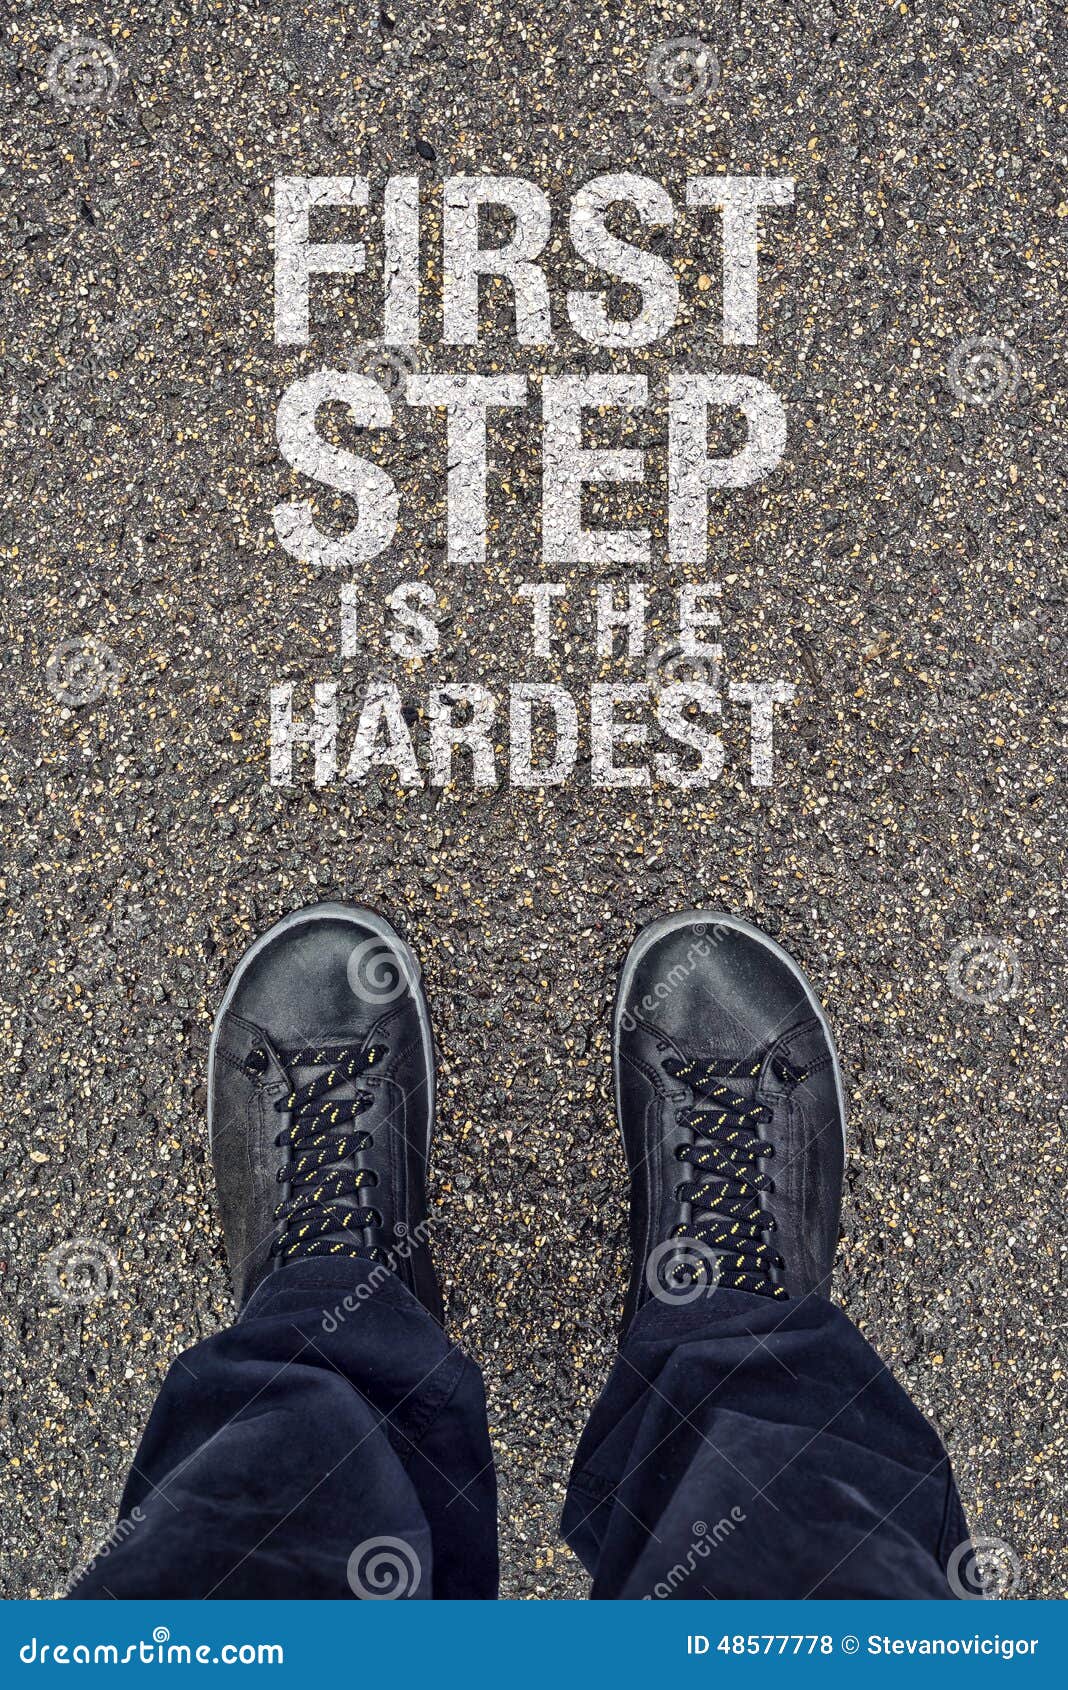 first step is the hardest